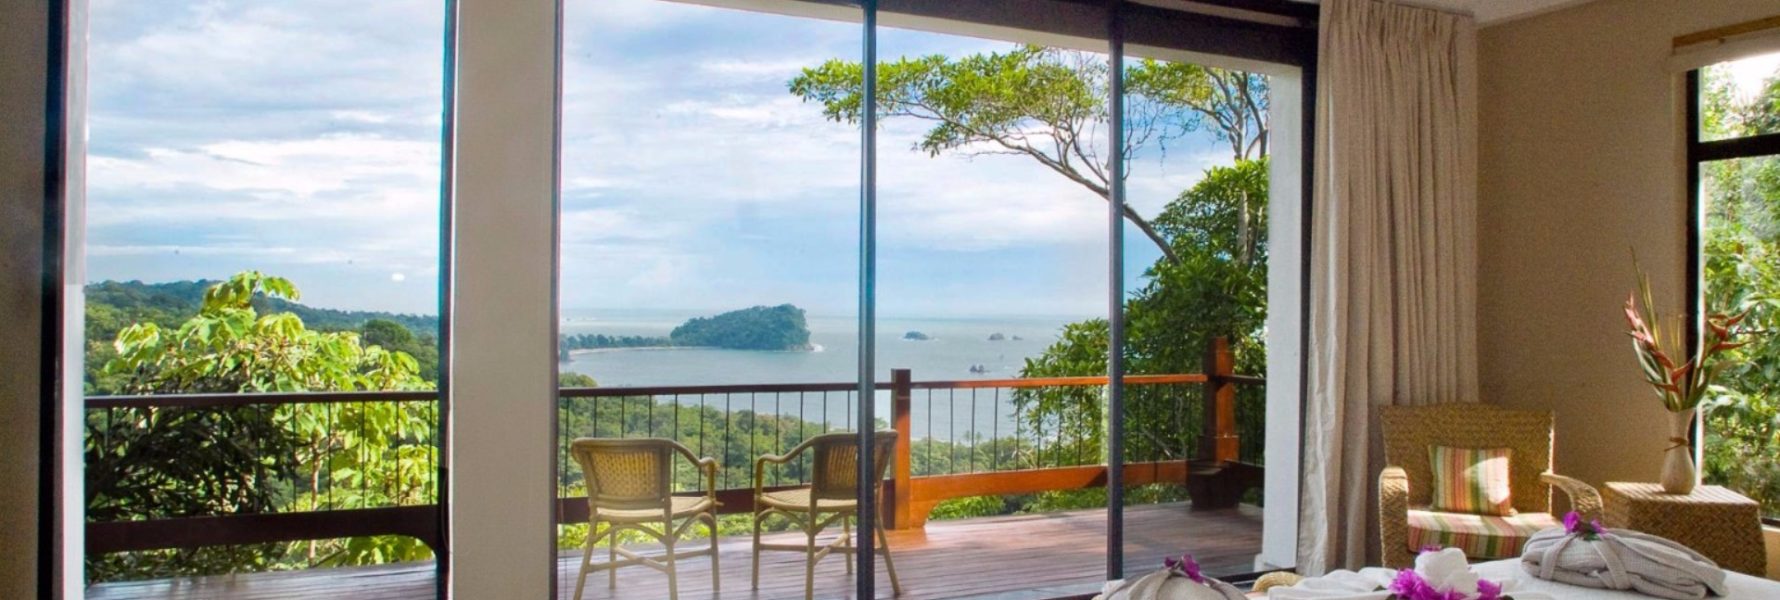 The master bedroom has a private balcony and monkeys are sure to visit almost every day!